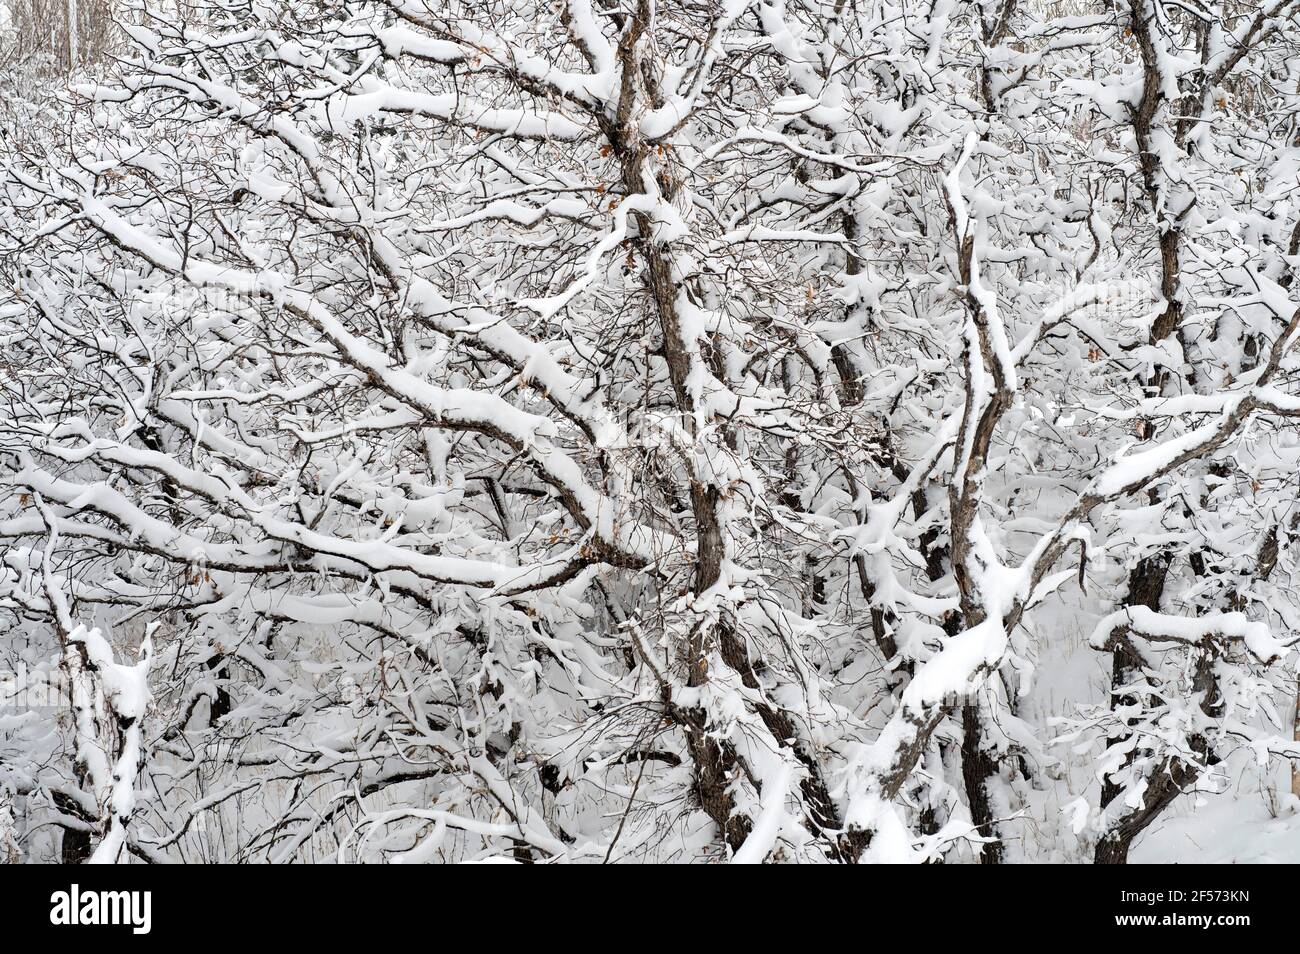 Heavy snow on scrub oak trees, from a late Spring snowstorm in Colorado Springs., Colorado. Stock Photo